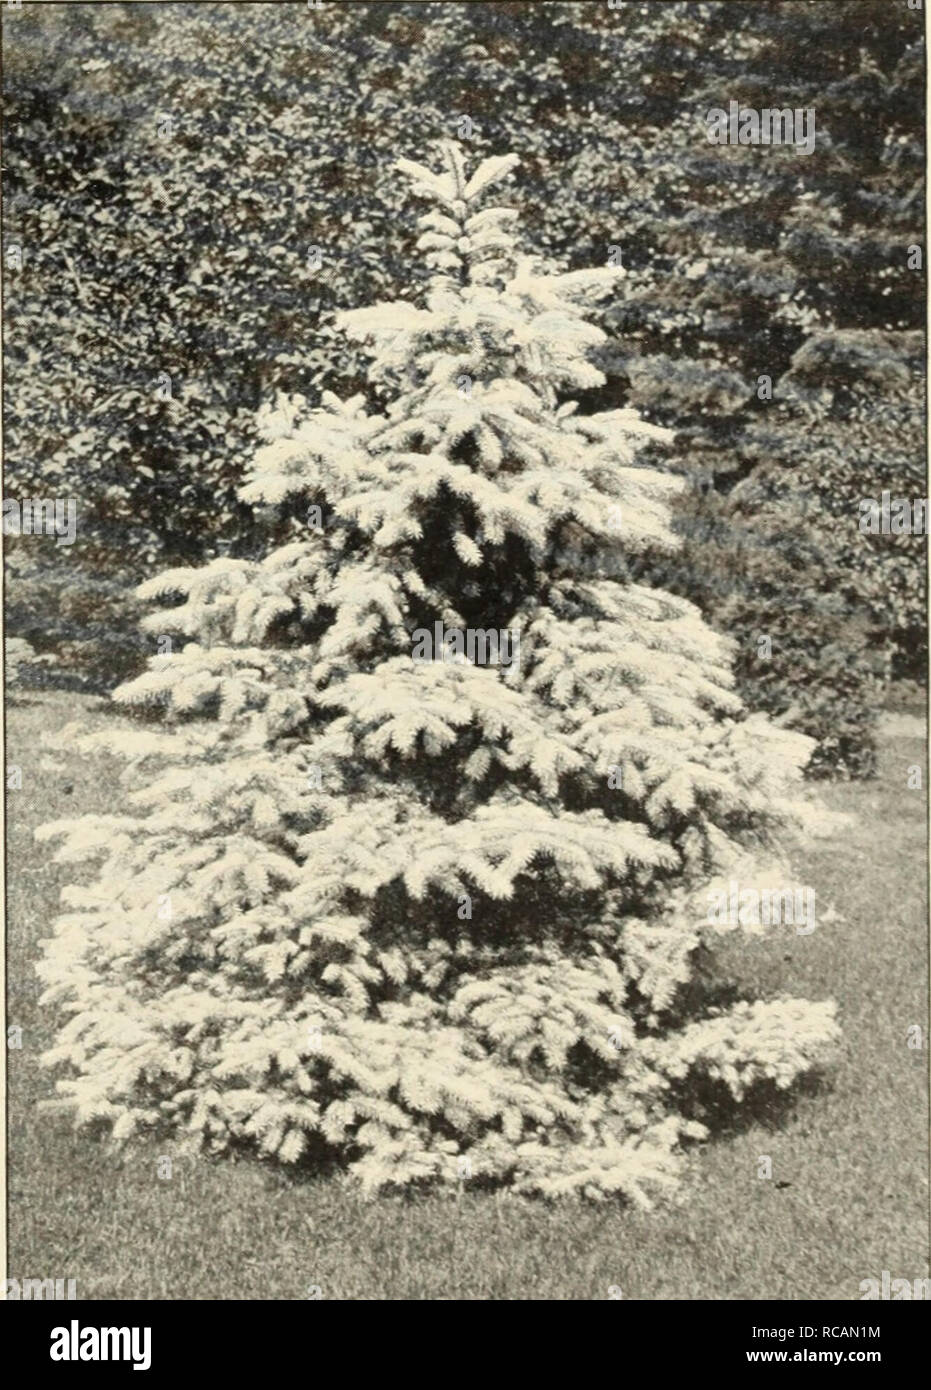 . Ellwanger &amp; Barry : Mount Hope nurseries. GENERAL CATALOGUE. 67 ABIES [including Ficea and Tsiiga Spruce, Fir and Hemlock. Section i. Abies. Spruce and Hemlock. -the He7nlocks, with flat leaves Leaves needle shaped, scattered all around the shoots {inchidhig Tsiiga- mostly two ranked). A. alba. White Spruce. A. A native tree of medium size, varying in height from 25 to 50 feet, of pjTamidal form. Foliage silvery gray, and bark light colored. Very hardy and valuable. 50c. tvar. caerulea. The Glaucous Spruce. B. A small and beautiful variety, of rather loose spread- ing habit, w-ith bluis Stock Photo